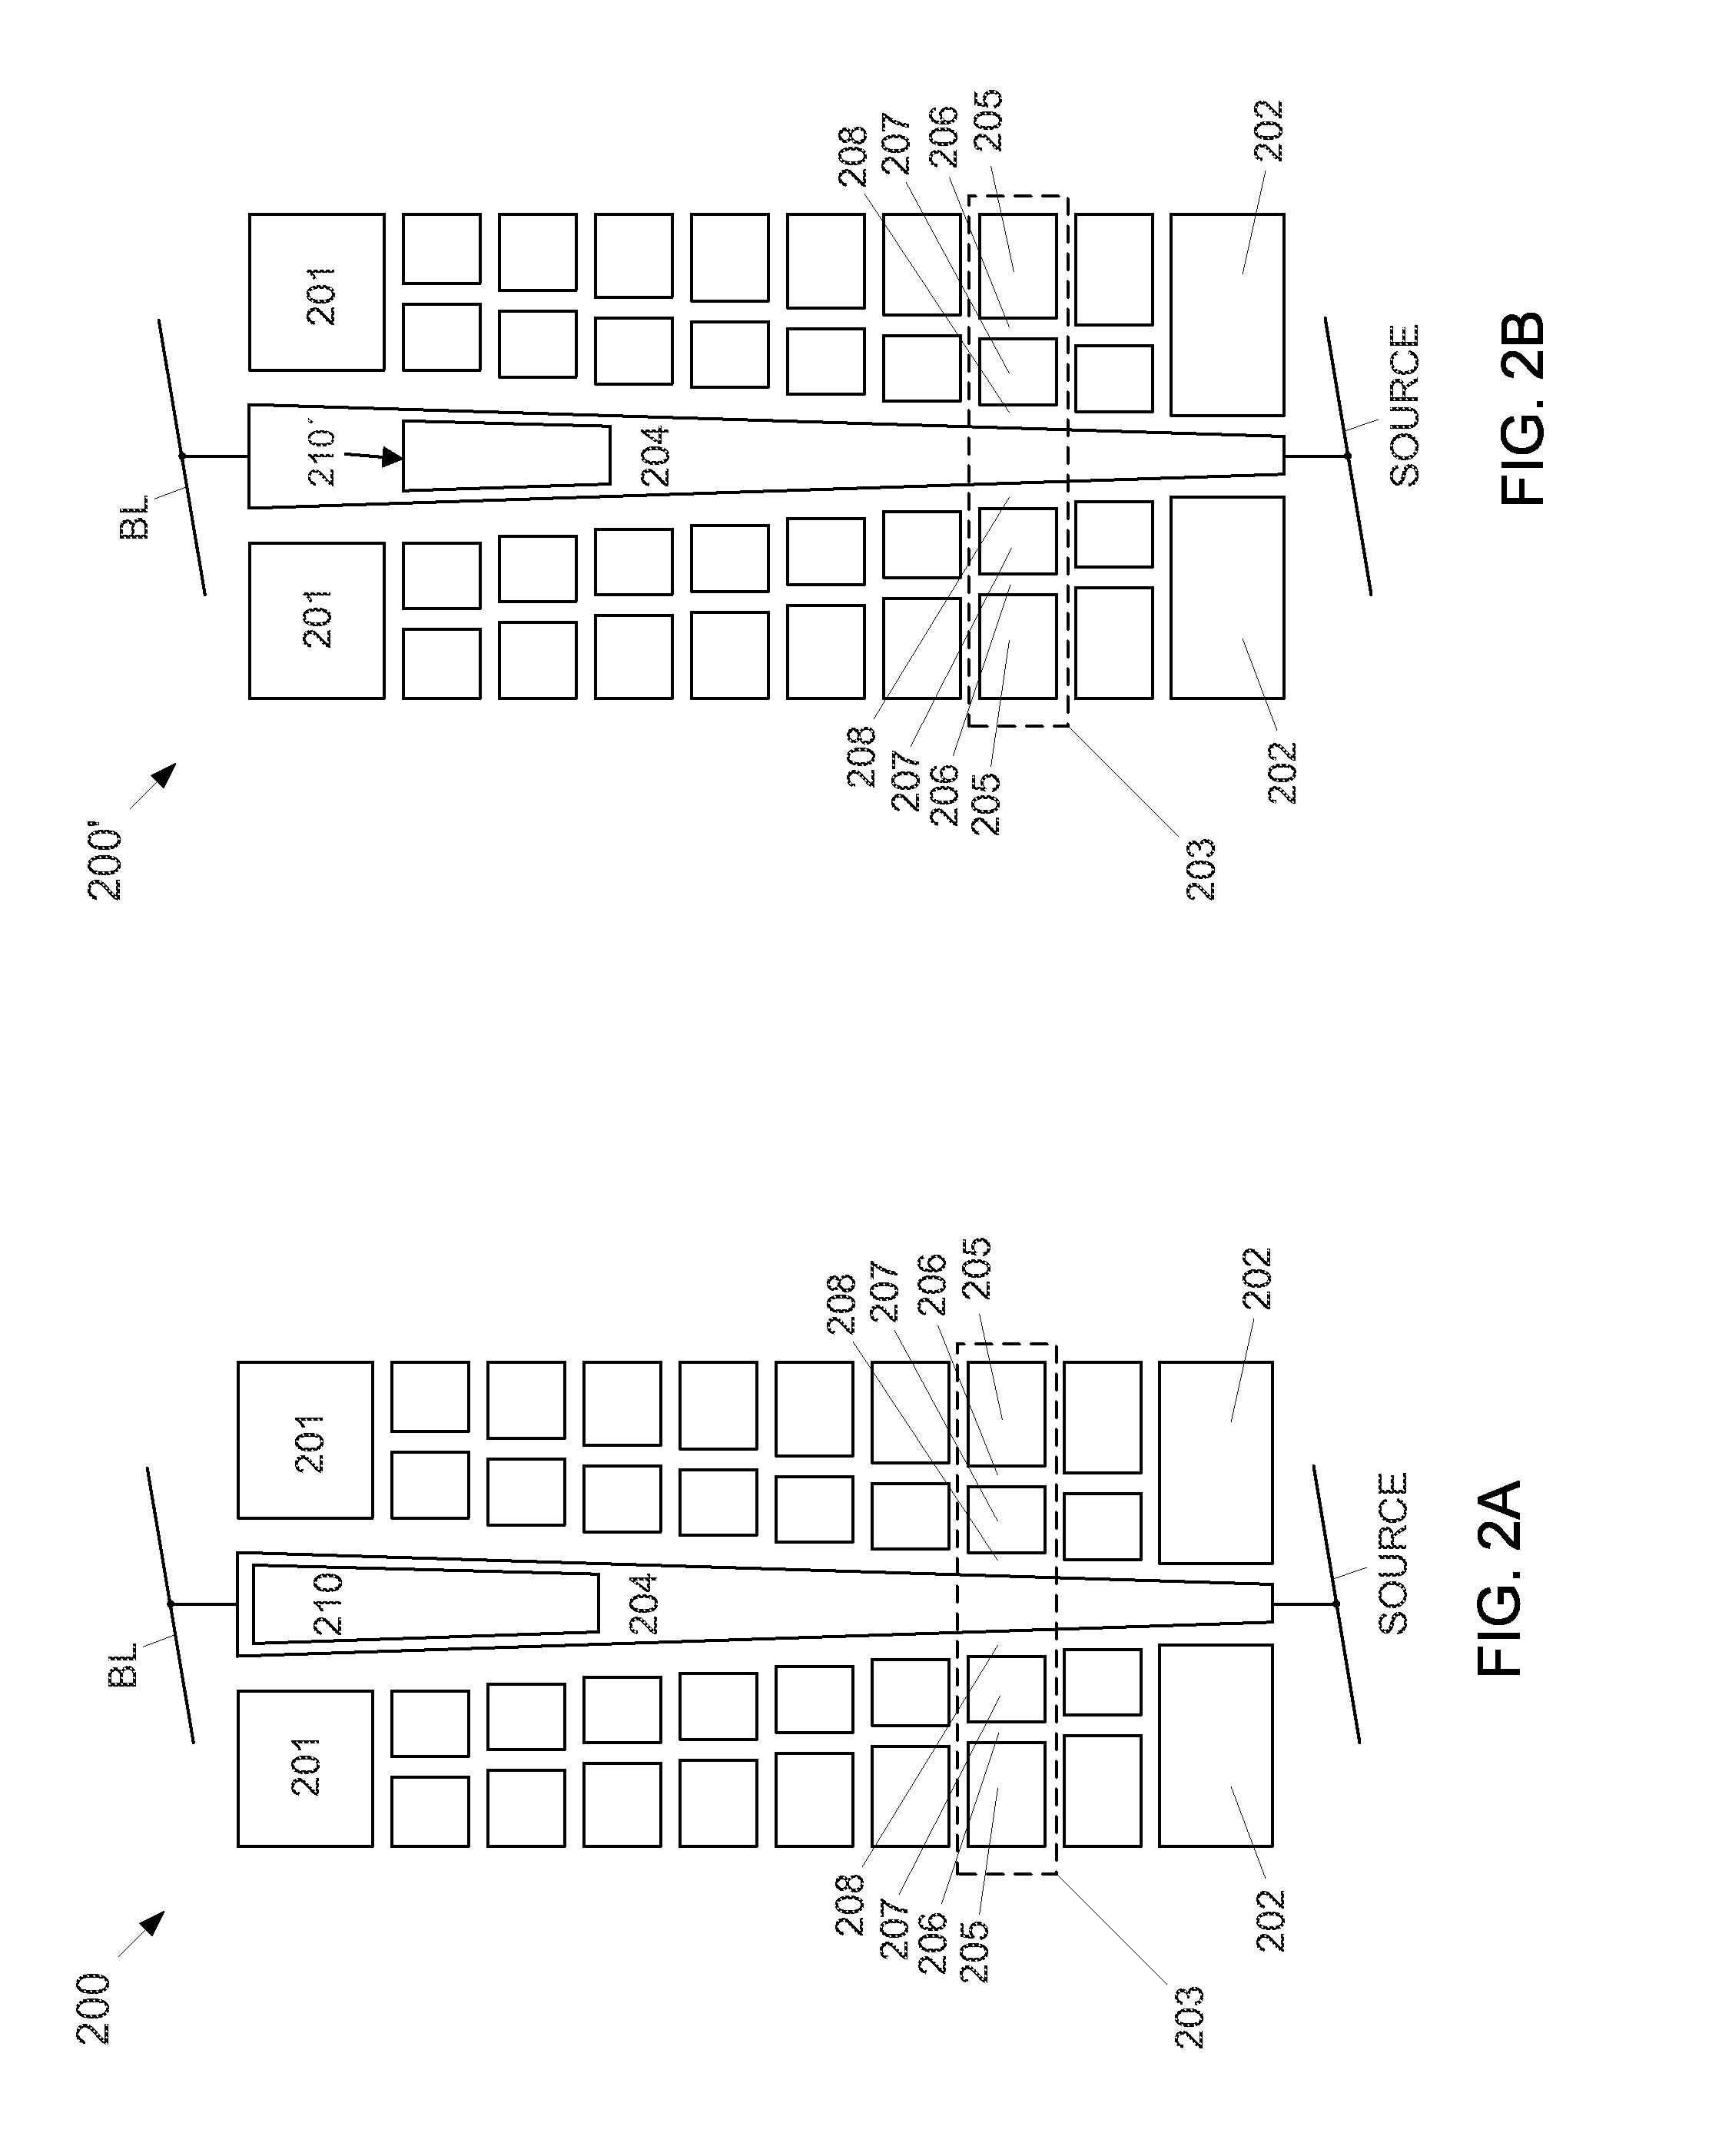 Local buried channel dielectric for vertical NAND performance enhancement and vertical scaling